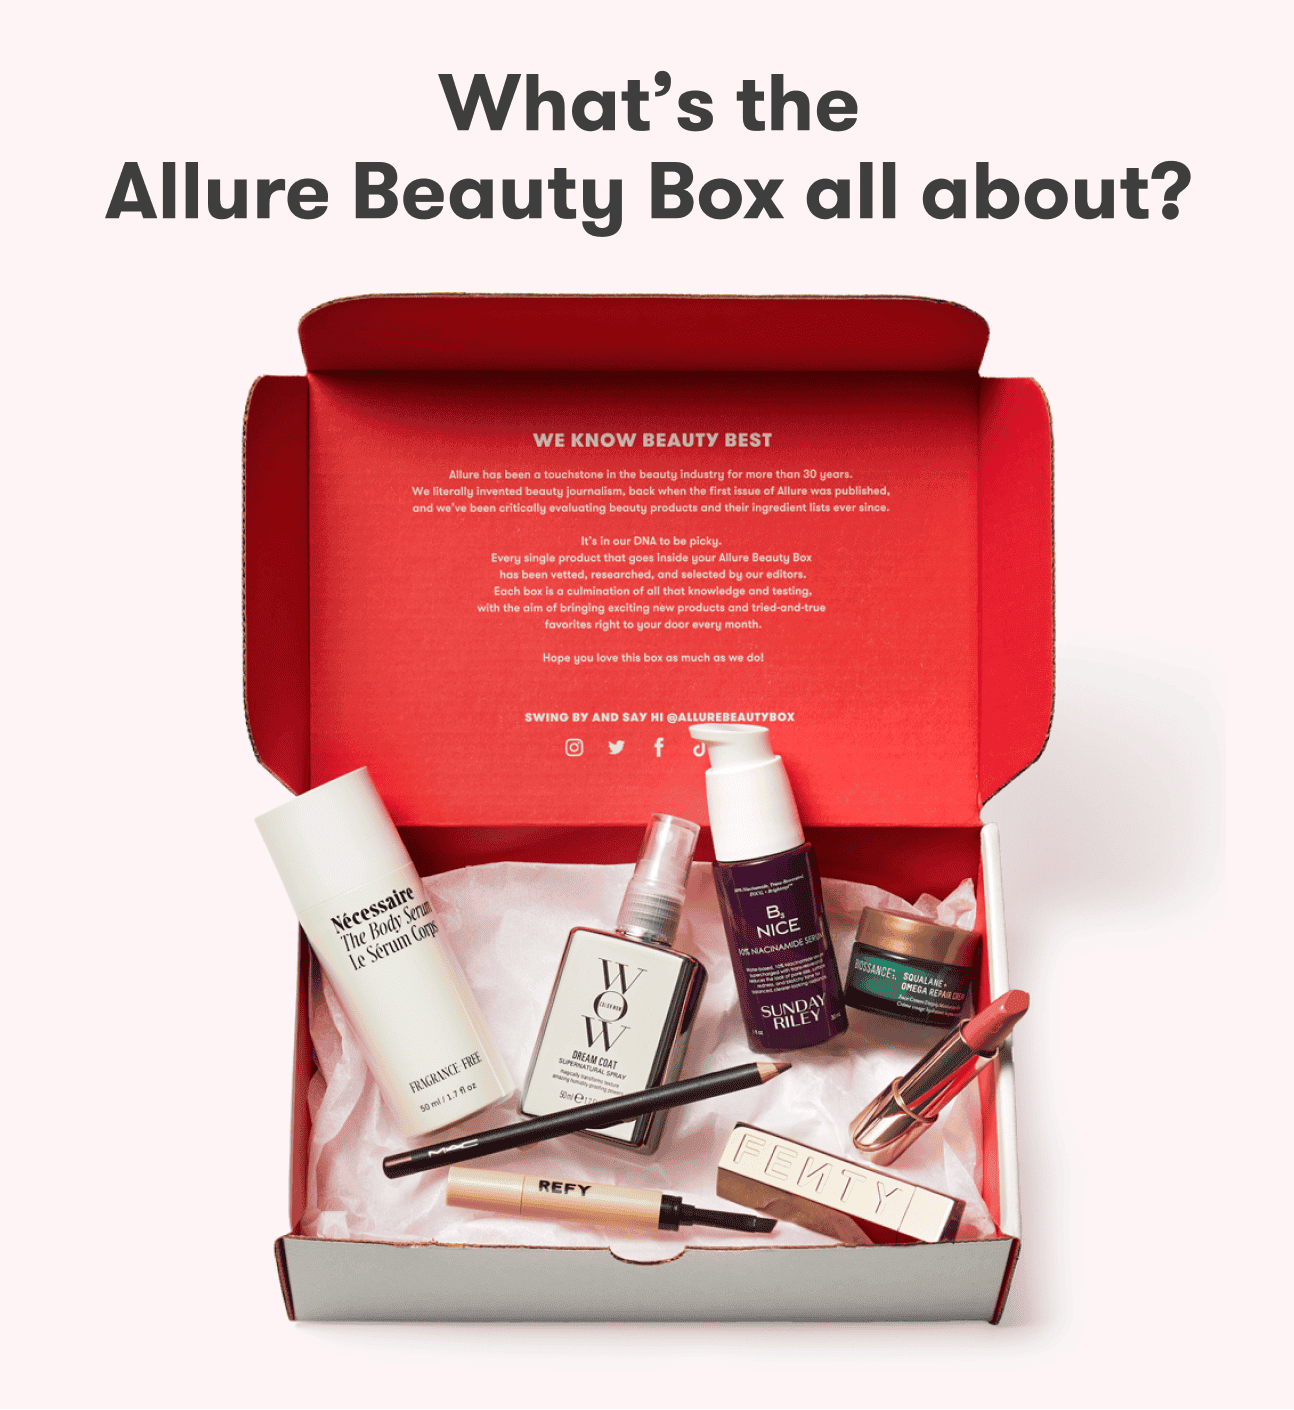 Whats the Allure Beauty box all about? The box opened with showing the featured beauty box products.